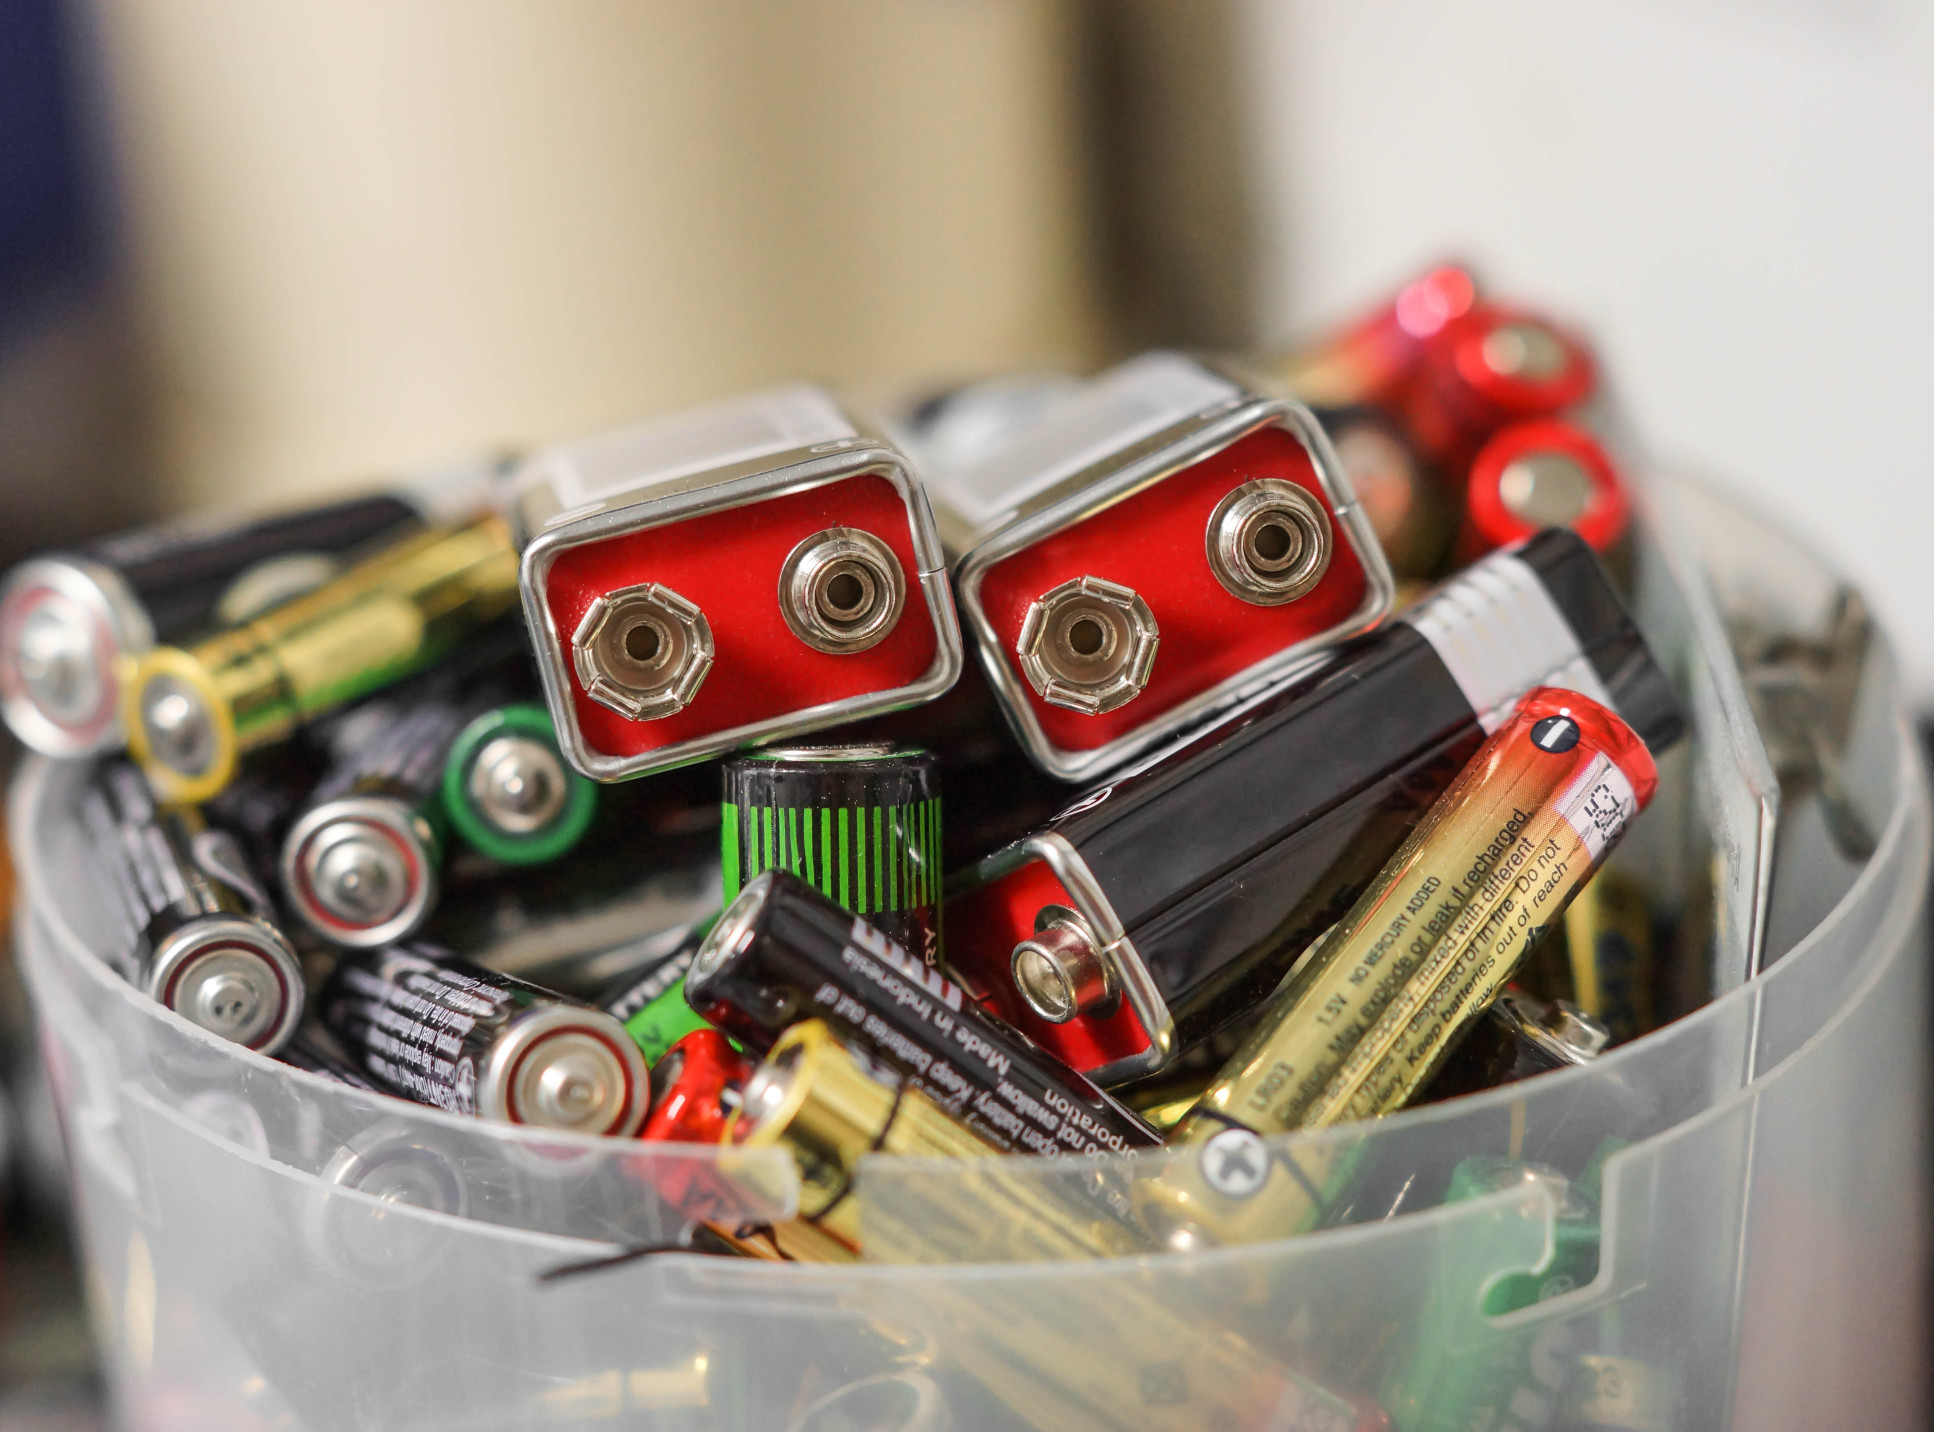 A collection of used batteries